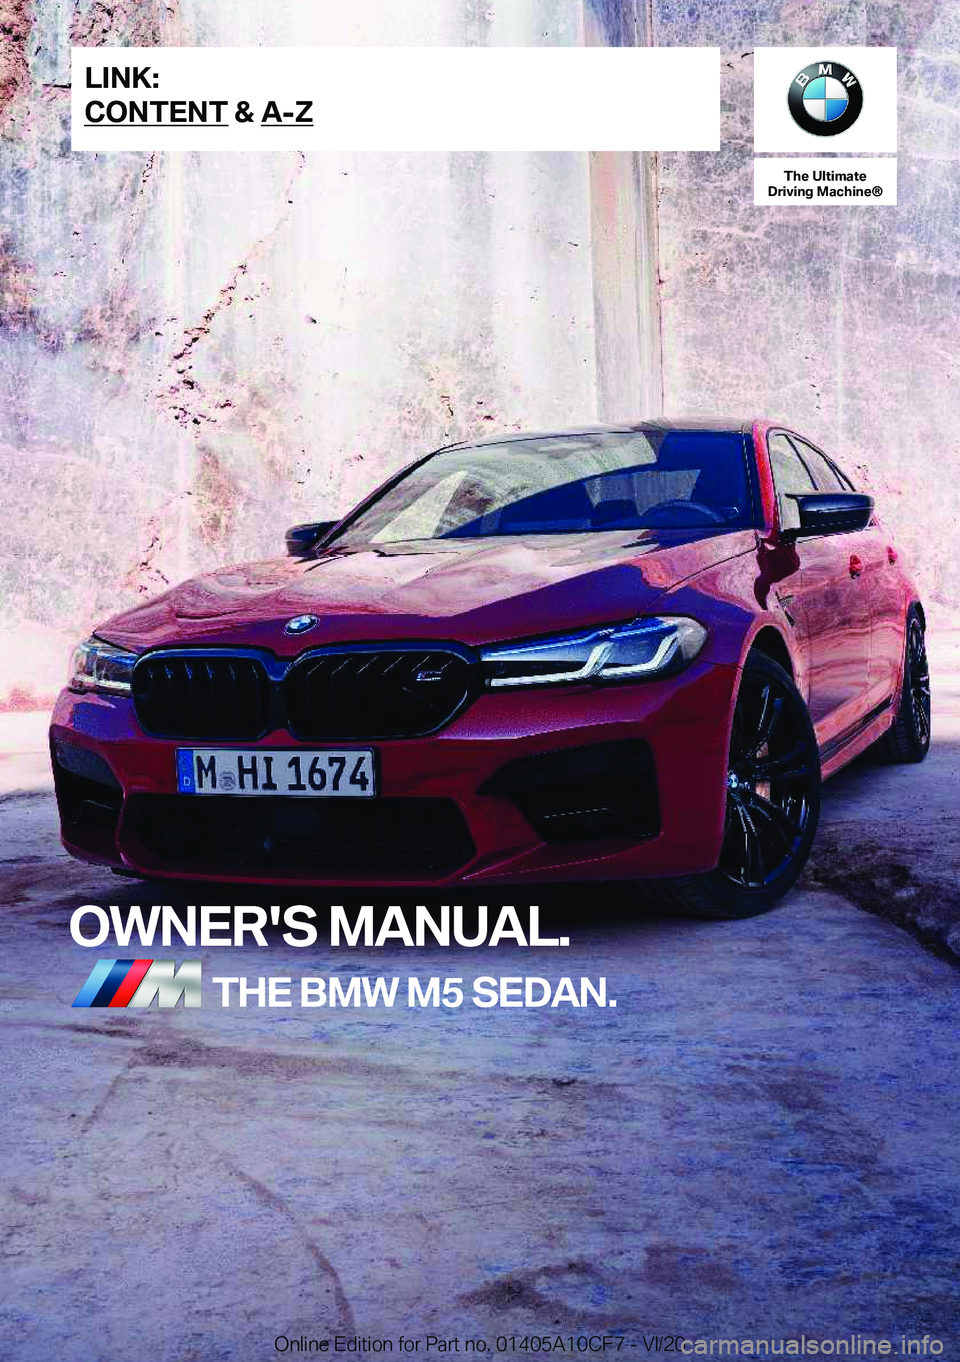 BMW M5 2021  Owners Manual �T�h�e��U�l�t�i�m�a�t�e
�D�r�i�v�i�n�g��M�a�c�h�i�n�e�n
�O�W�N�E�R�'�S��M�A�N�U�A�L�.�T�H�E��B�M�W��M�5��S�E�D�A�N�.�L�I�N�K�:
�C�O�N�T�E�N�T��&��A�-�Z�O�n�l�i�n�e��E�d�i�t�i�o�n��f�o�r�